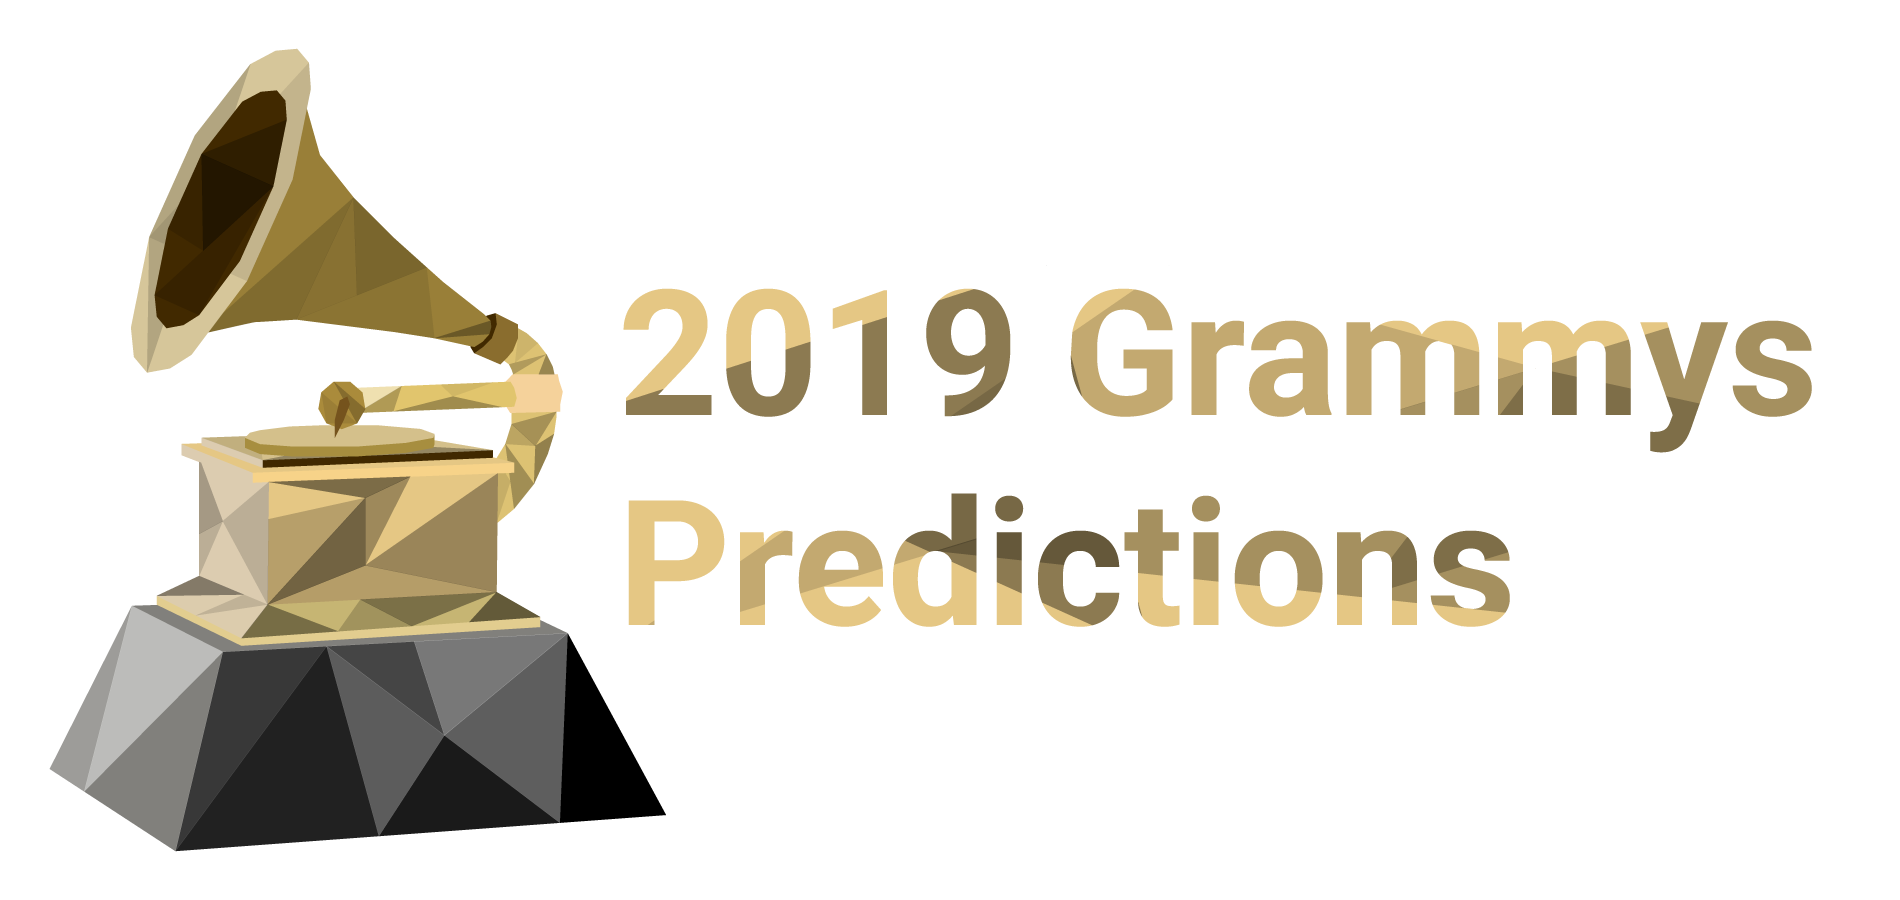 Grammys Predictions 2019: Who Will Win, Who Should Win and Who Was Snubbed